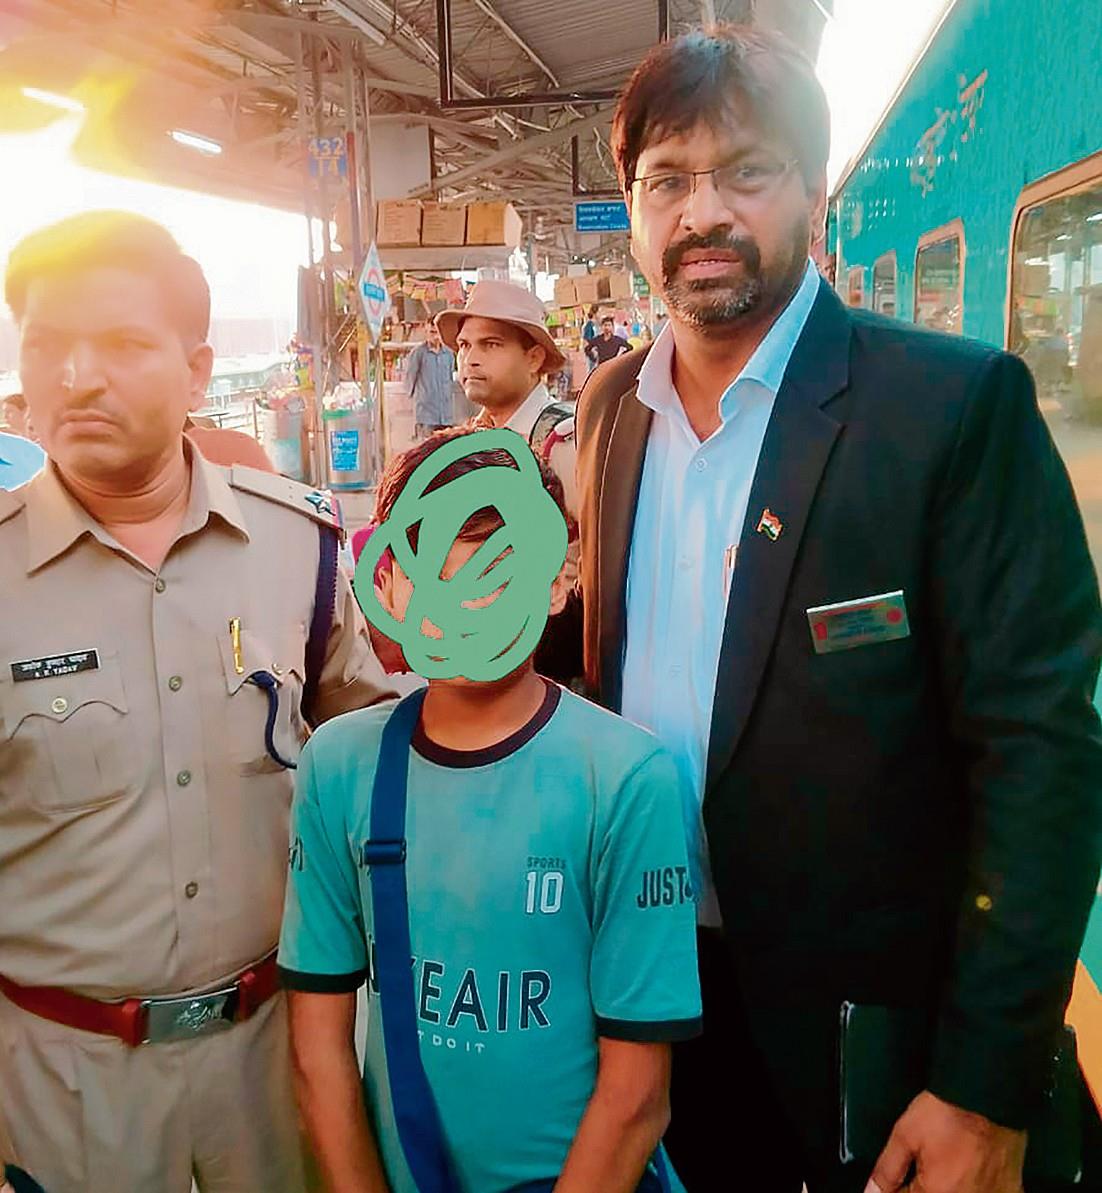 Railway officials reunite child lost in Sachkhand Express with parents